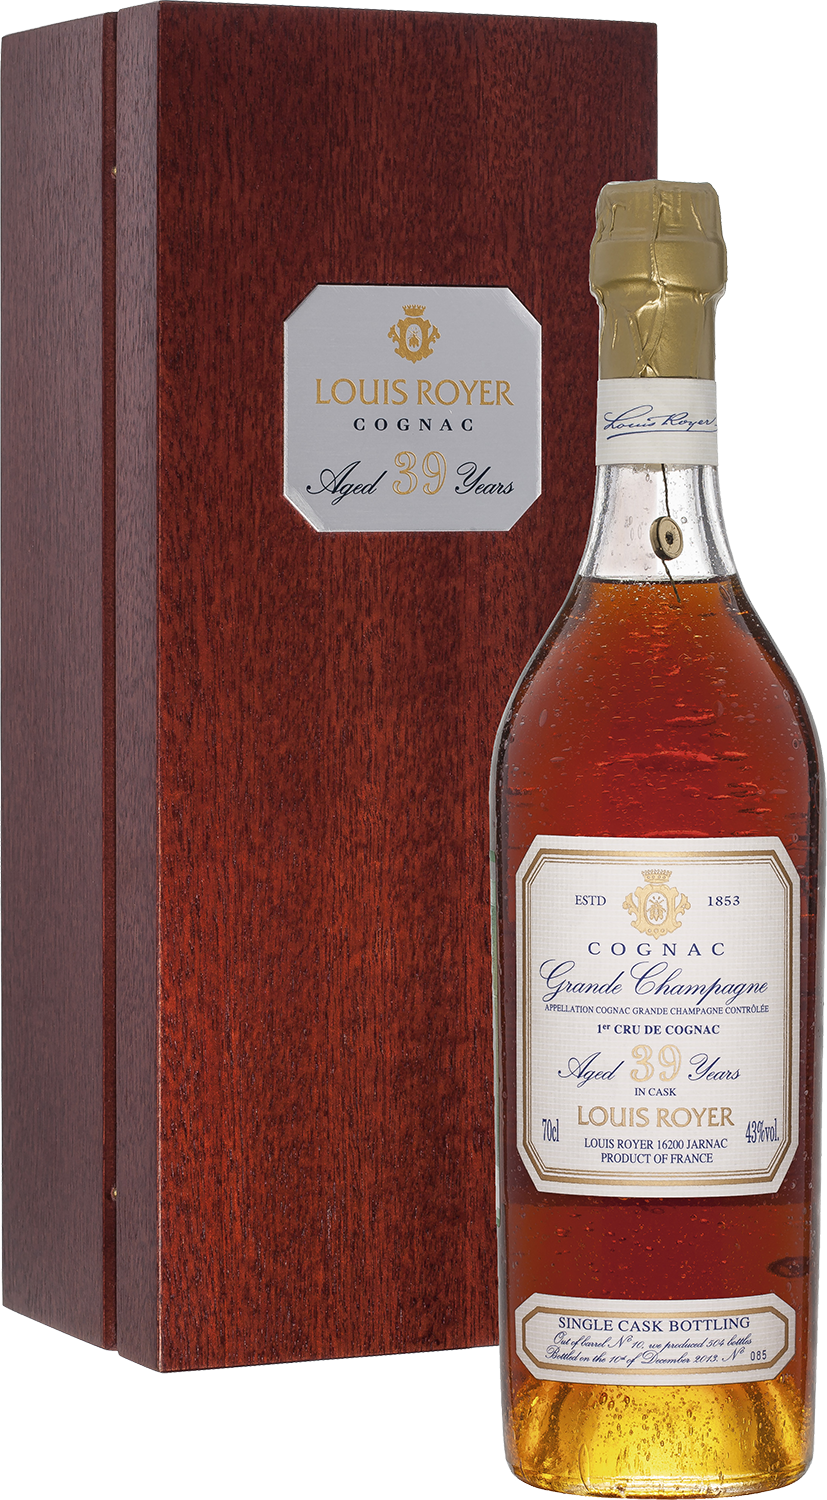 Cognac Louis Royer 39 years Grande Champagne (gift box) lautrec cognac xo grande champagne premier cru gift box